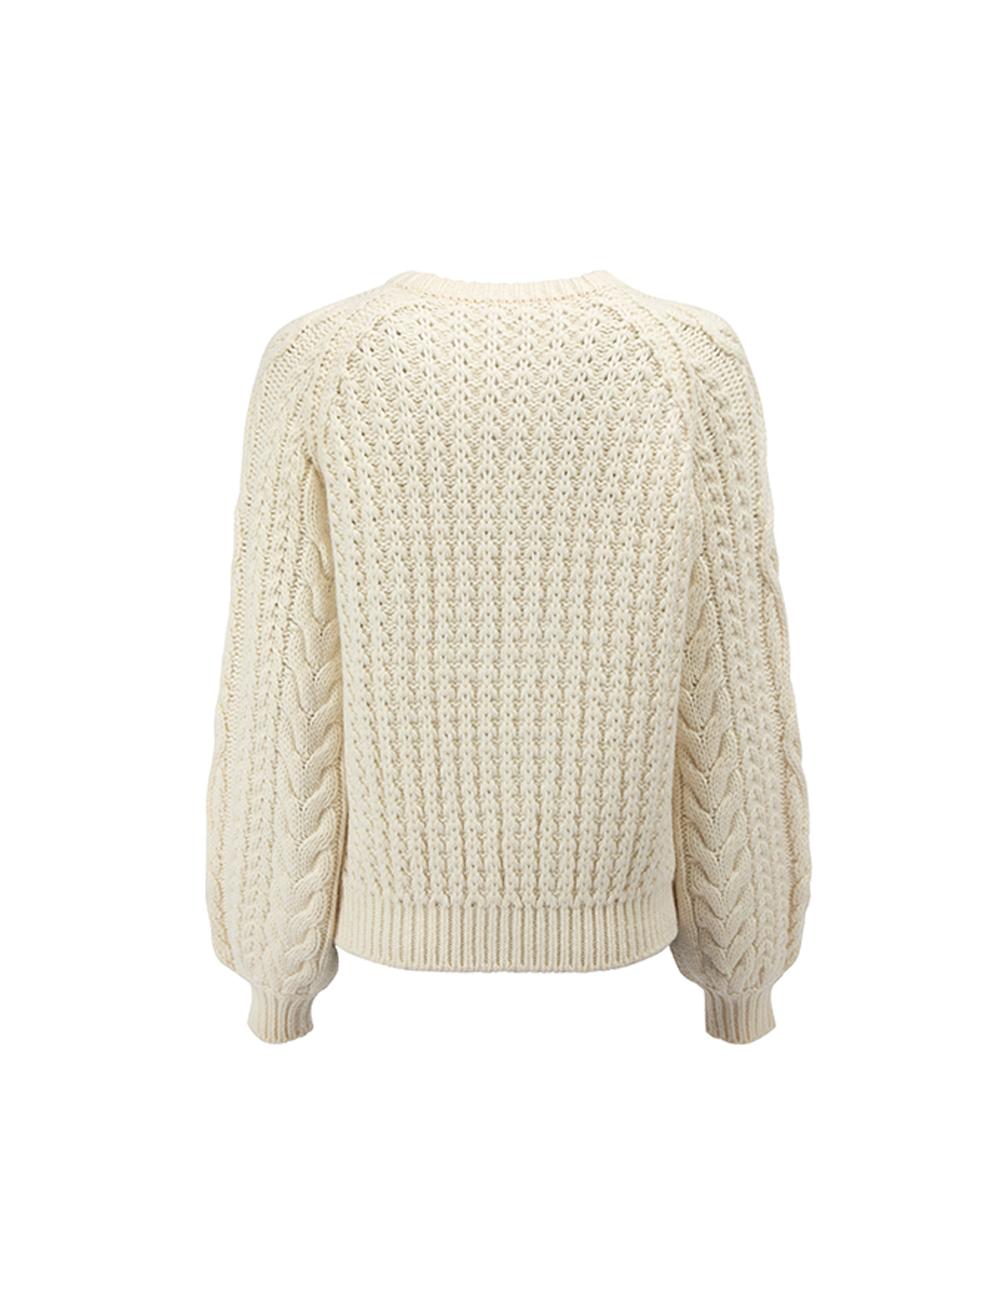 Maje Women's Cream Cable Knit Jumper In New Condition For Sale In London, GB